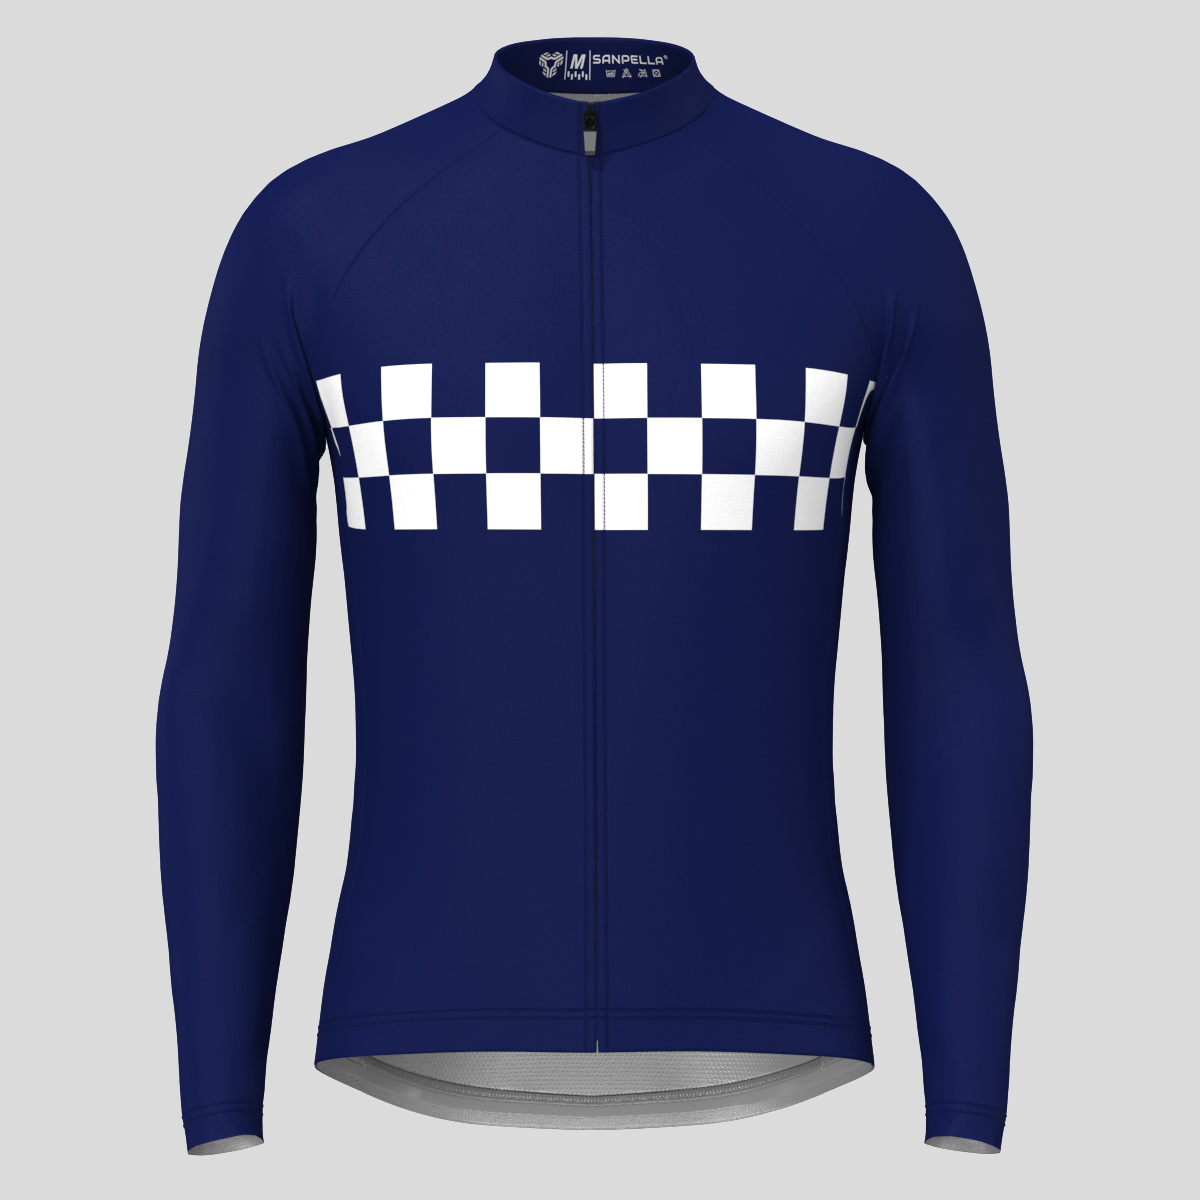 Men's Checkered Flag Retro LS Cycling Jersey - Ink